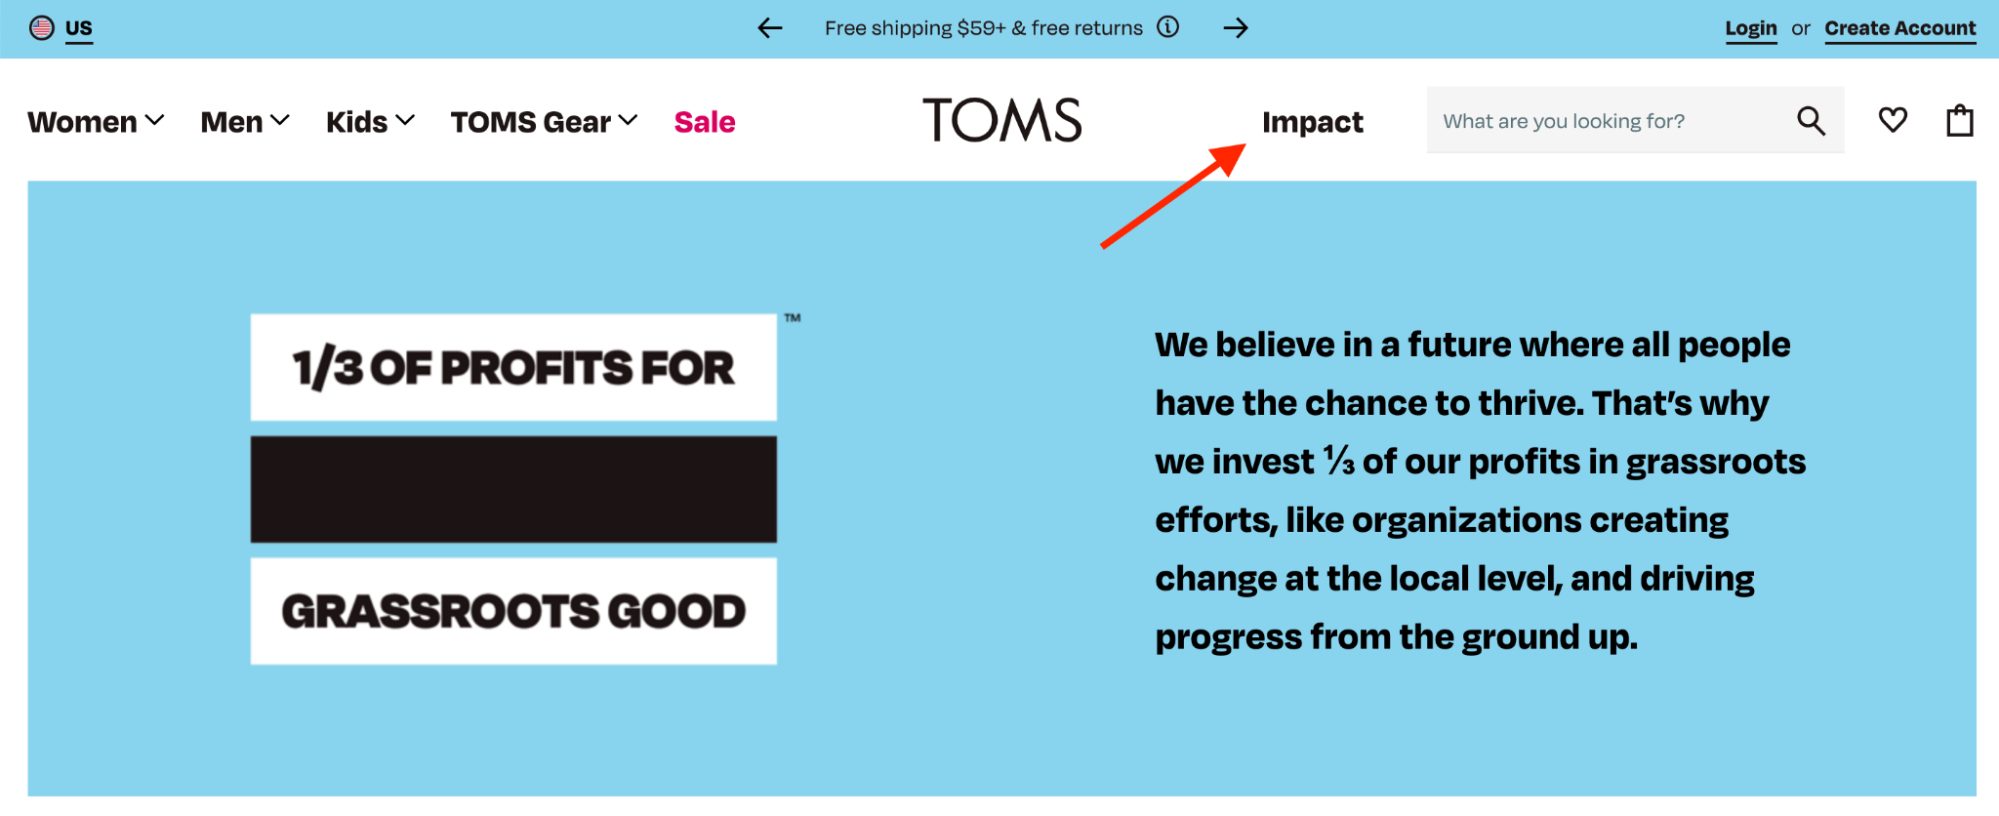 TOMS shoes Impact messaging